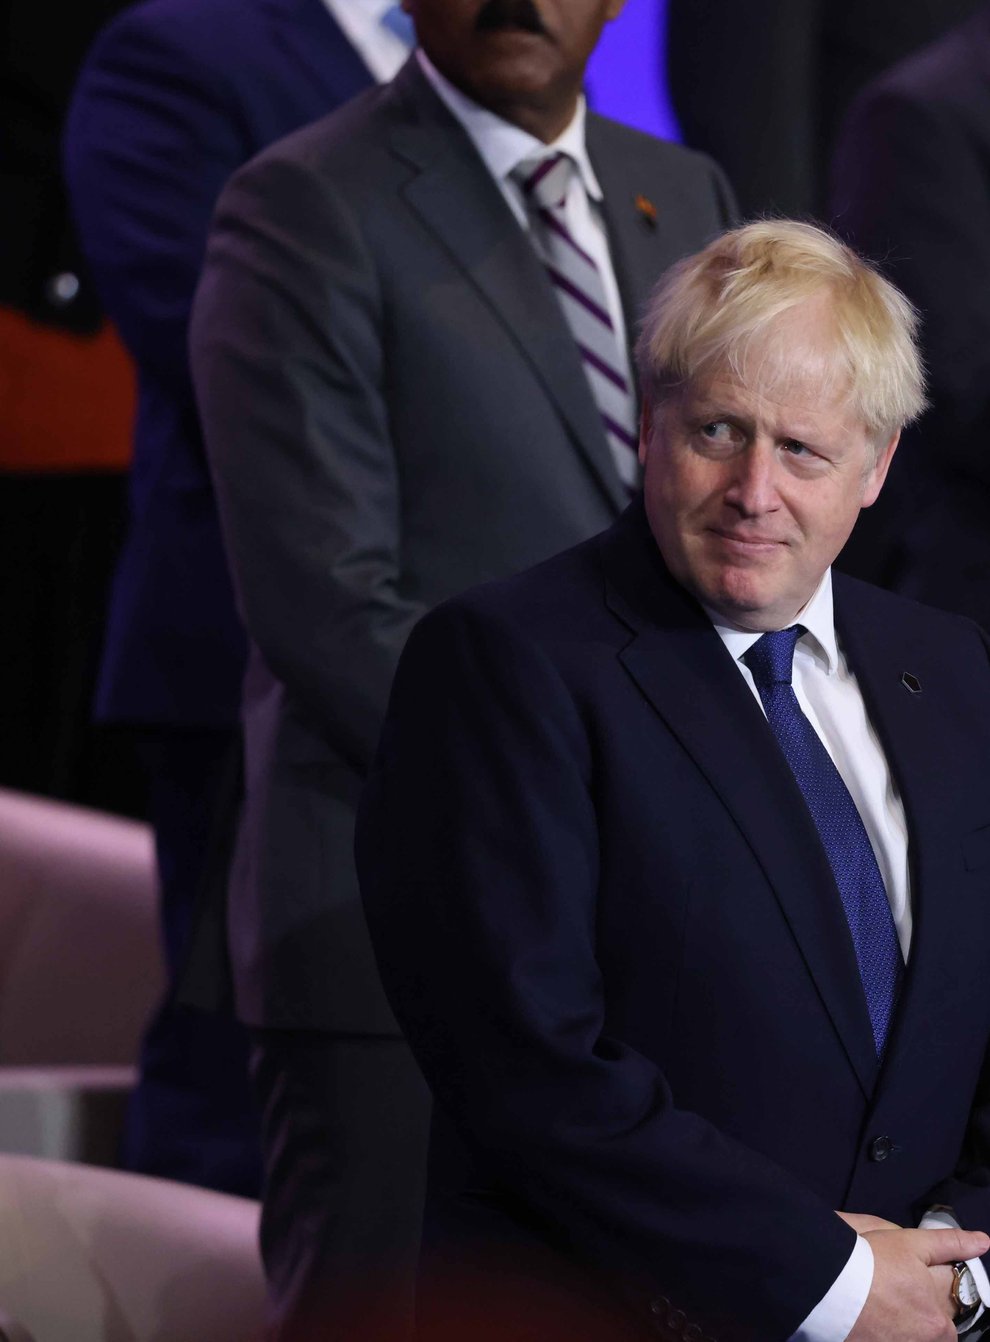 Boris Johnson did not appear dented by the political blows during broadcast interviews with British media (Ian Vogler/Daily Mirror/PA)